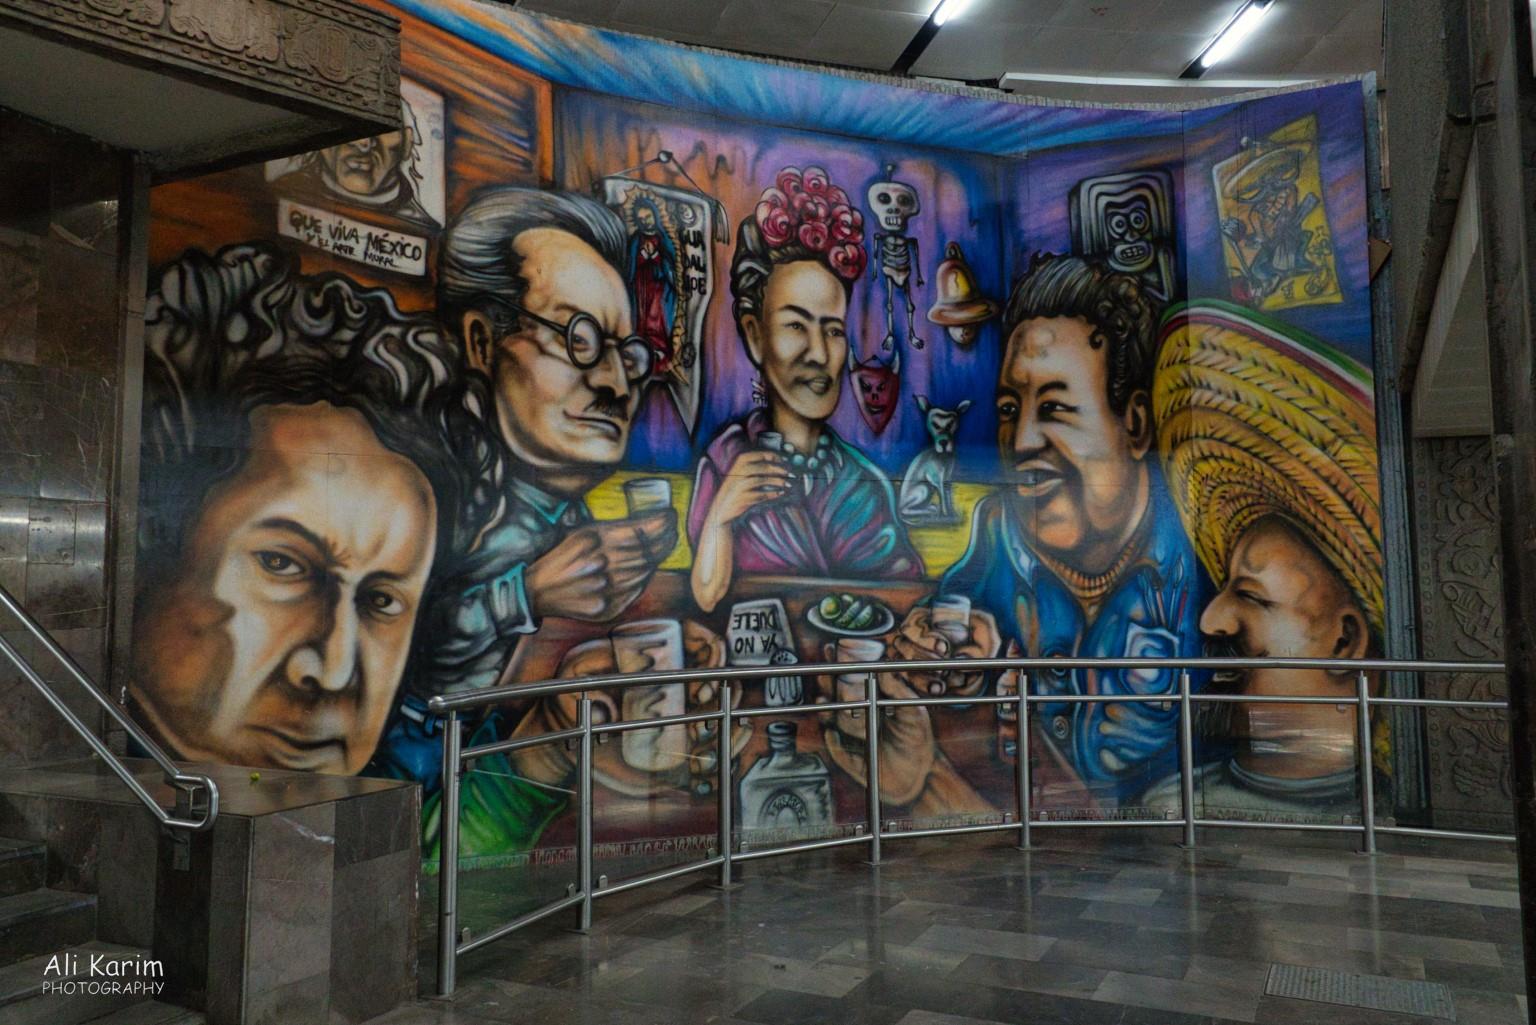 Mexico City, Mexico, Dec 2019, Interesting artwork at the subway station near our hotel